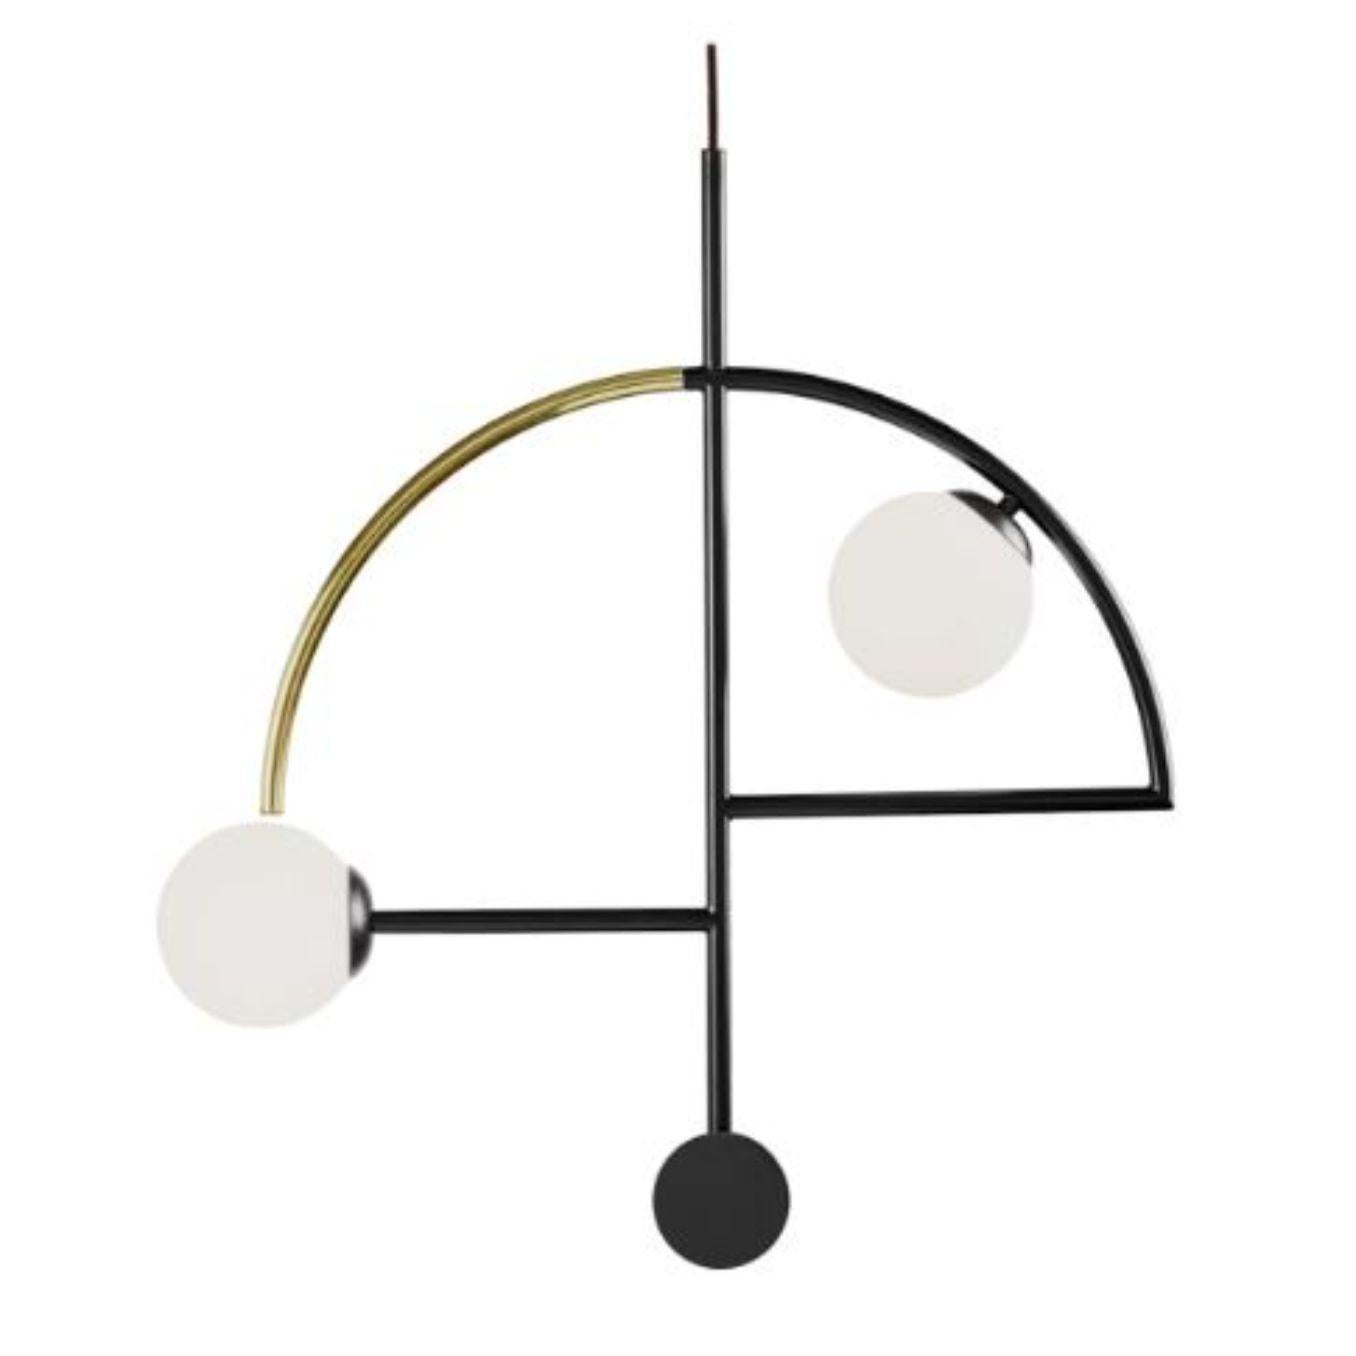 Lipstick Helio II Suspension lamp by Dooq
Dimensions: W 35 x D 35 x H 50 cm
Materials: lacquered metal, brass/nickel.
Also available in different colors and materials. 

Information:
230V/50Hz
2 x max. G9
4W LED

120V/60Hz
2 x max. G9
4W LED

All